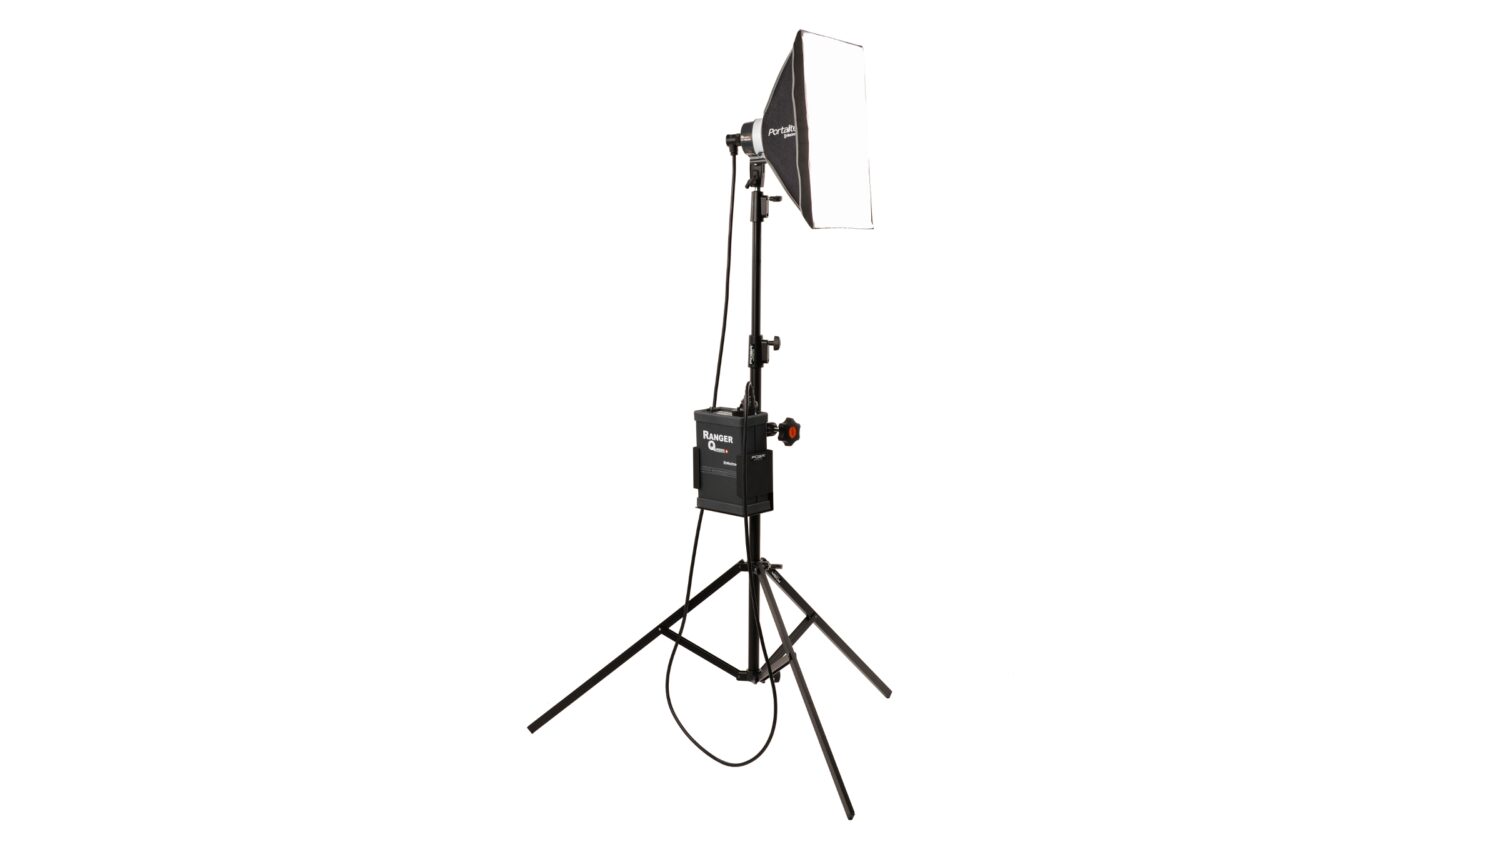 FOBA lamp stand with battery holder and telescope tube extension